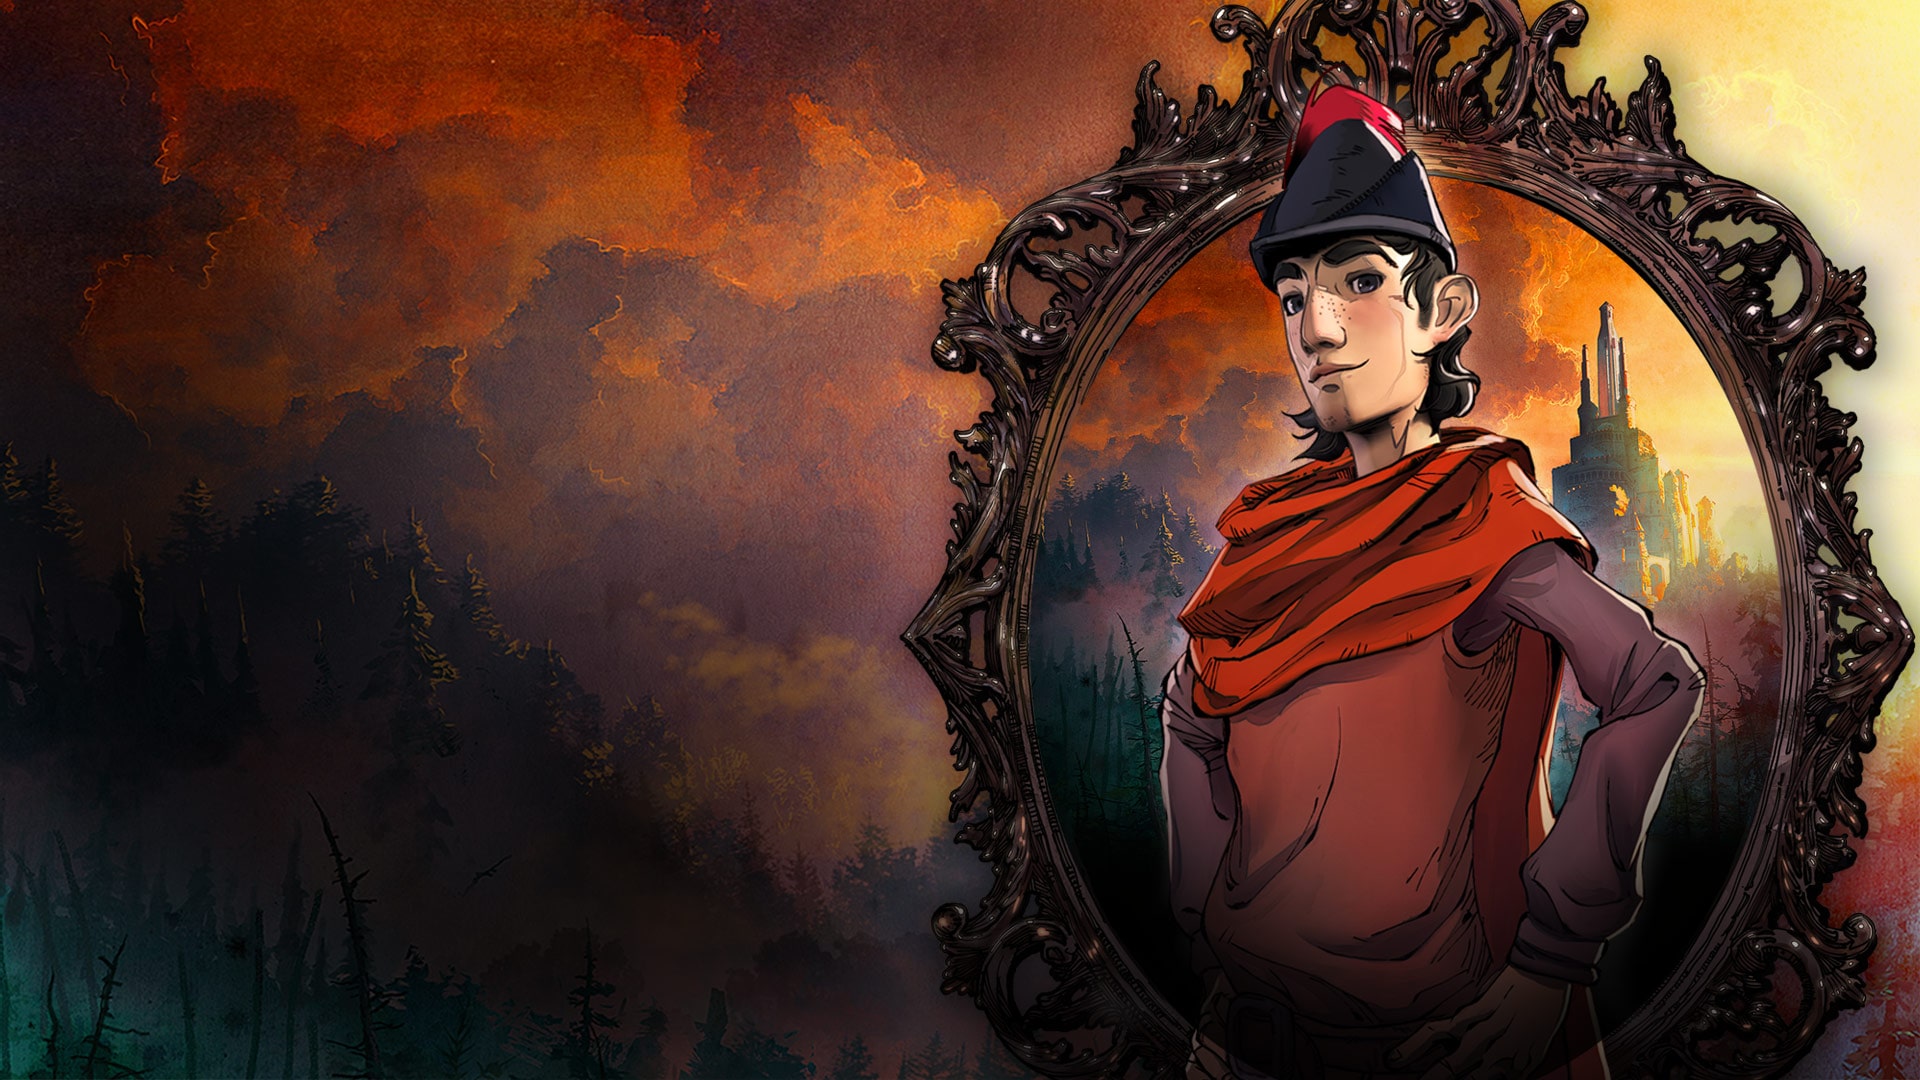 King's Quest – Chapter 1: A Knight to Remember